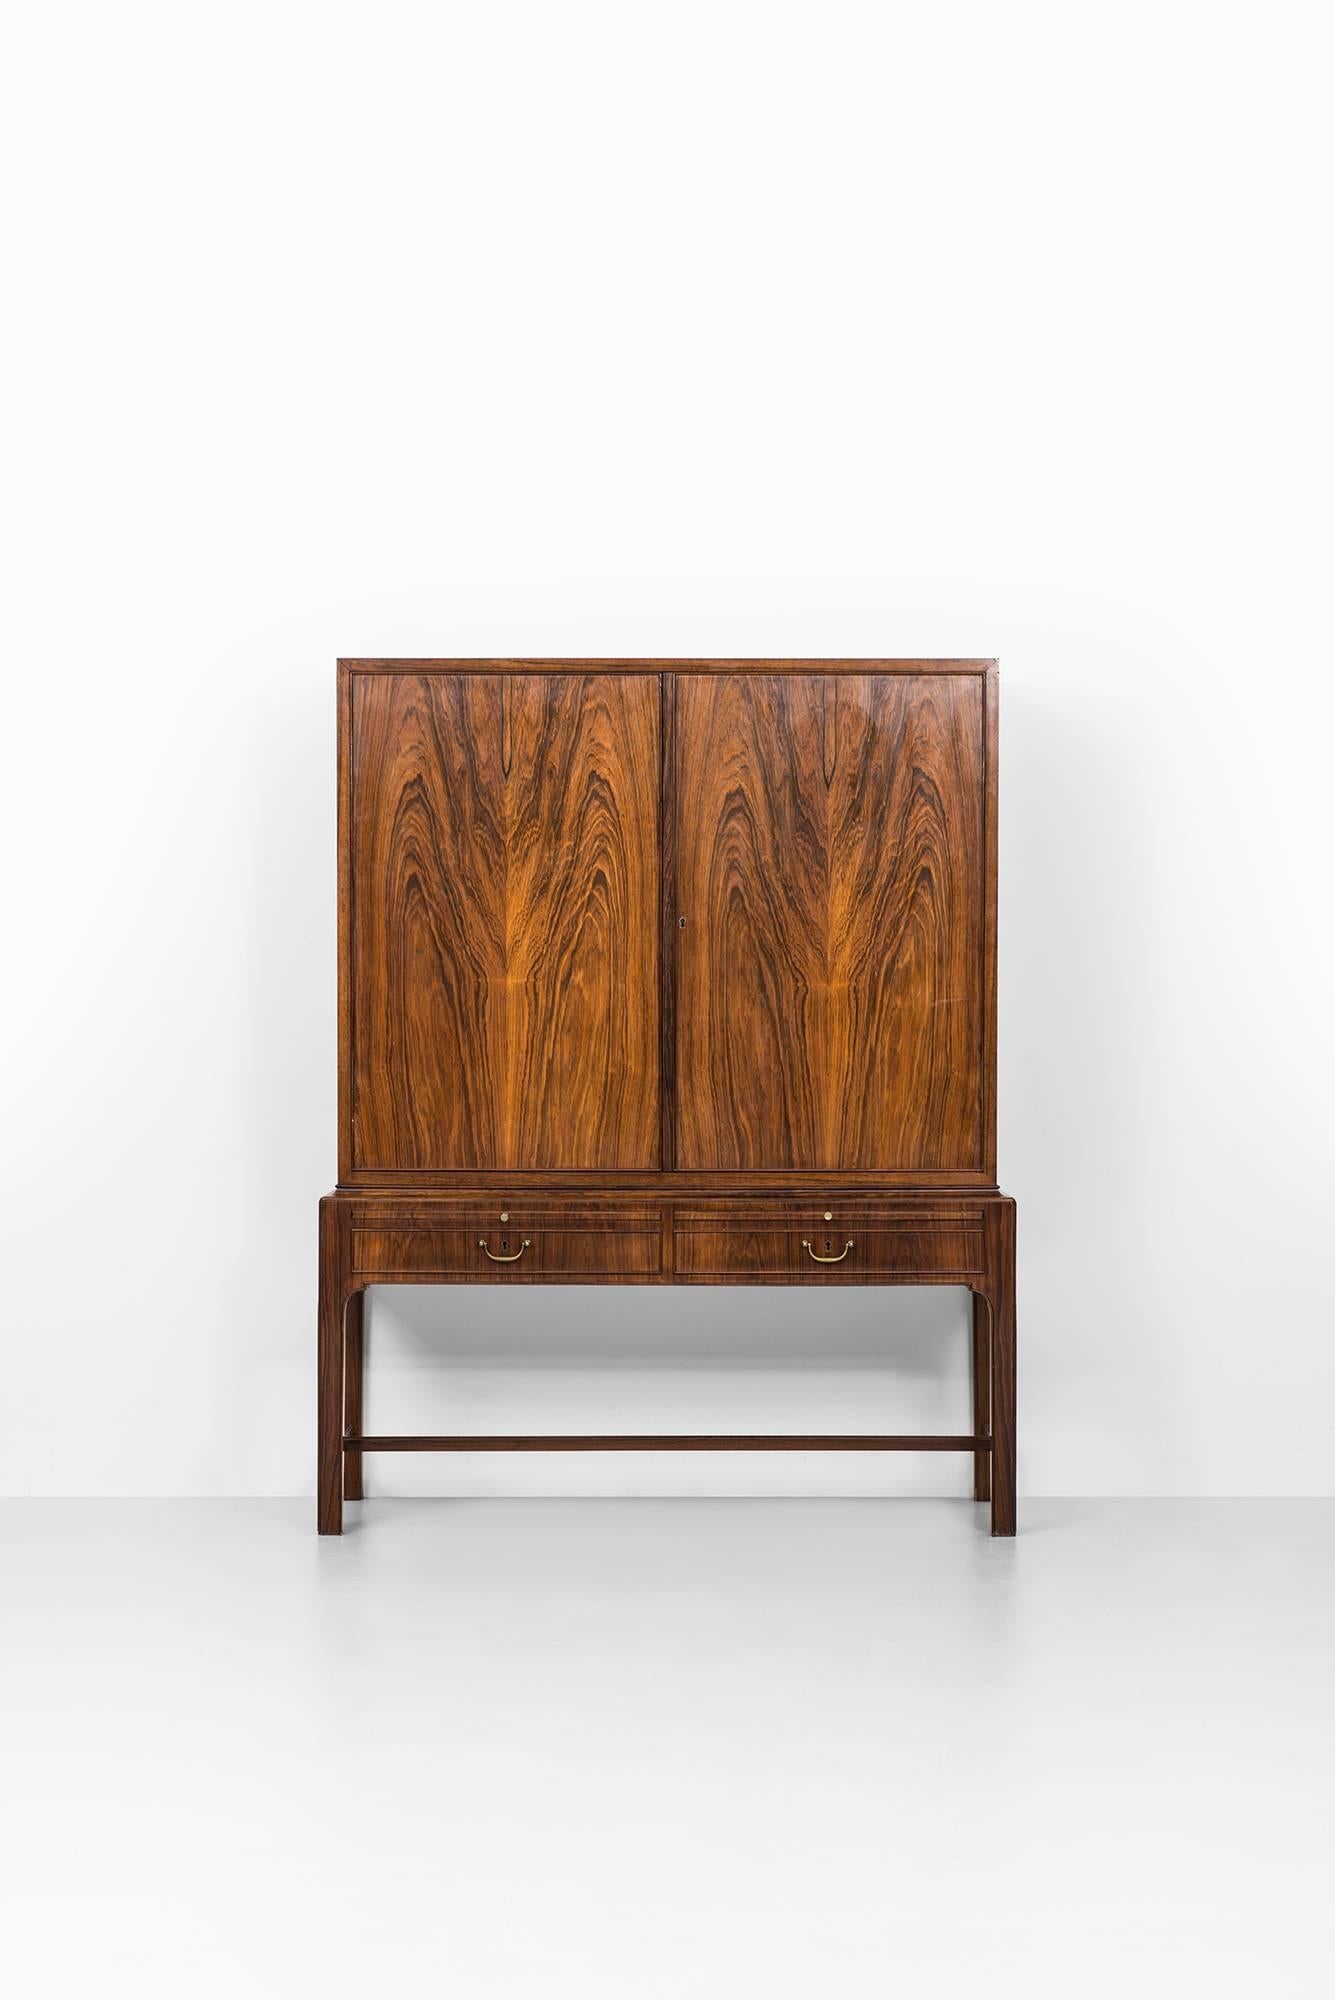 Very rare master cabinet attributed to Kaare Klint. Produced by cabinetmaker C.B Hansen in Denmark.